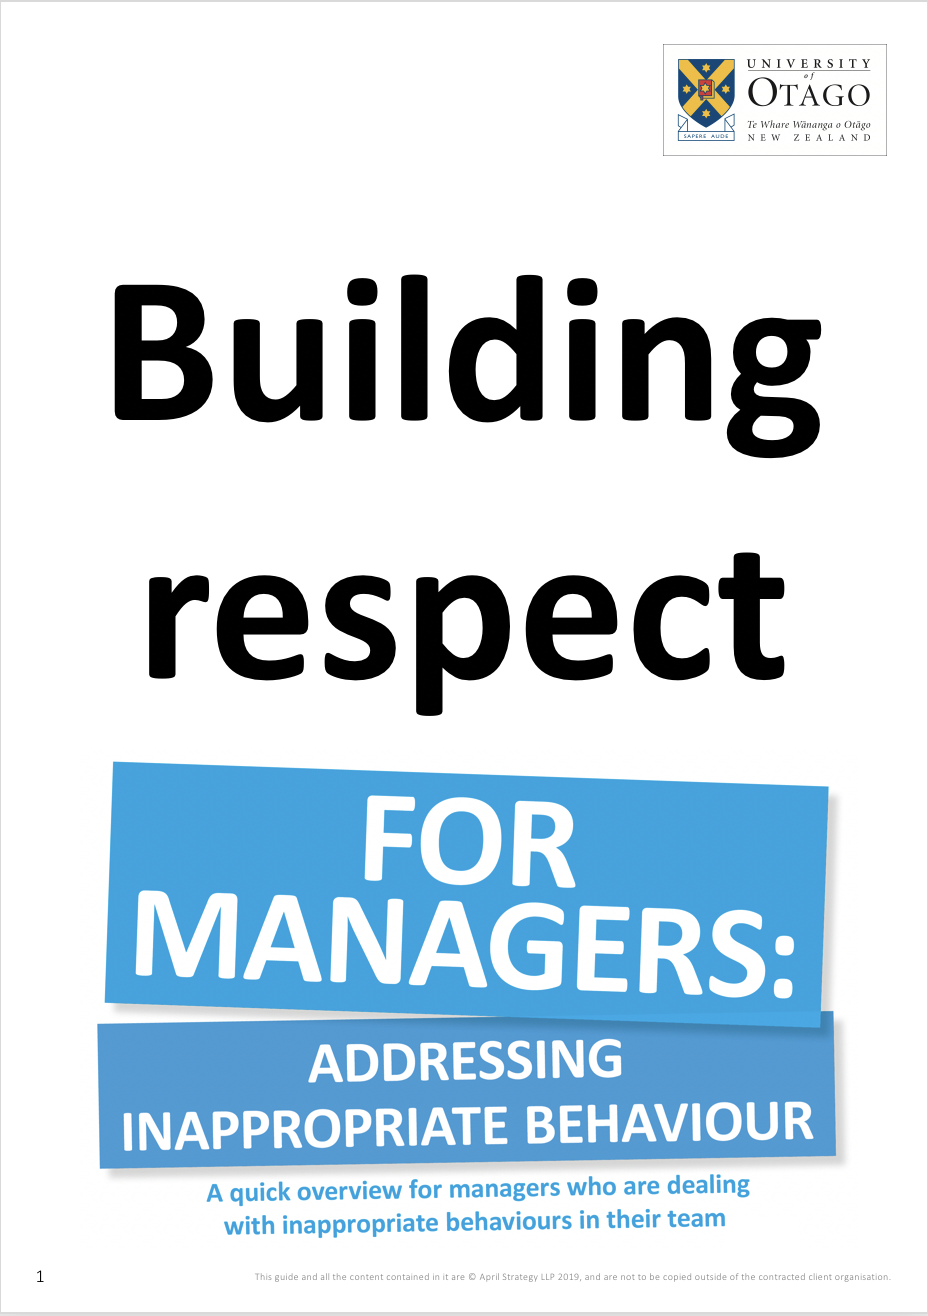 Managers addressing inappropriate behaviour